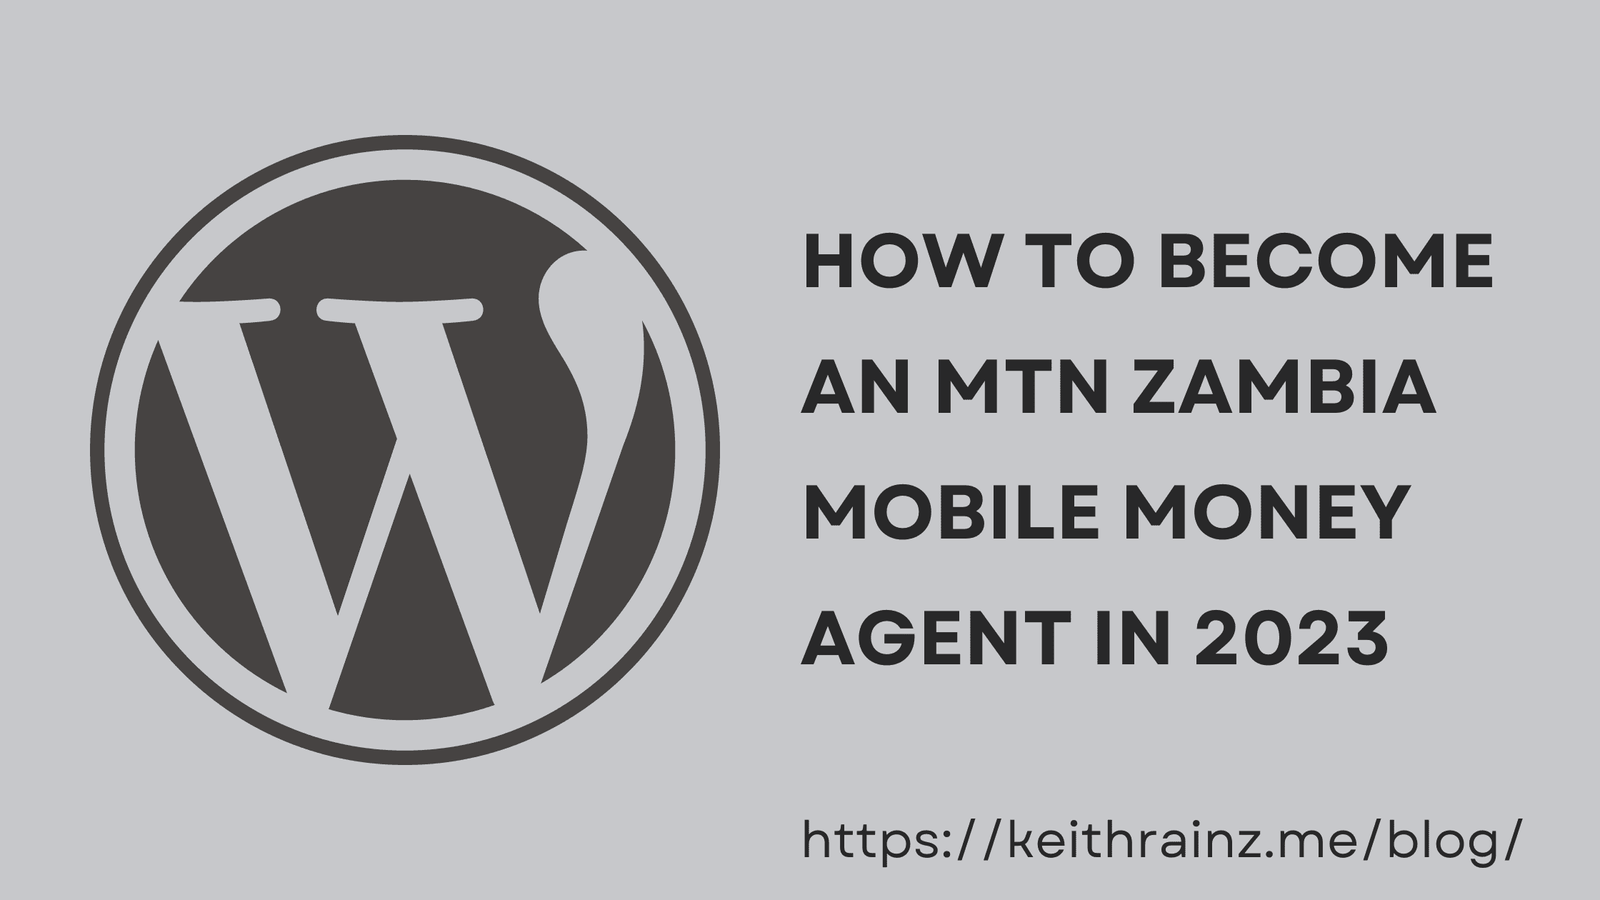 HOW TO BECOME AN MTN ZAMBIA MOBILE MONEY AGENT IN 2023